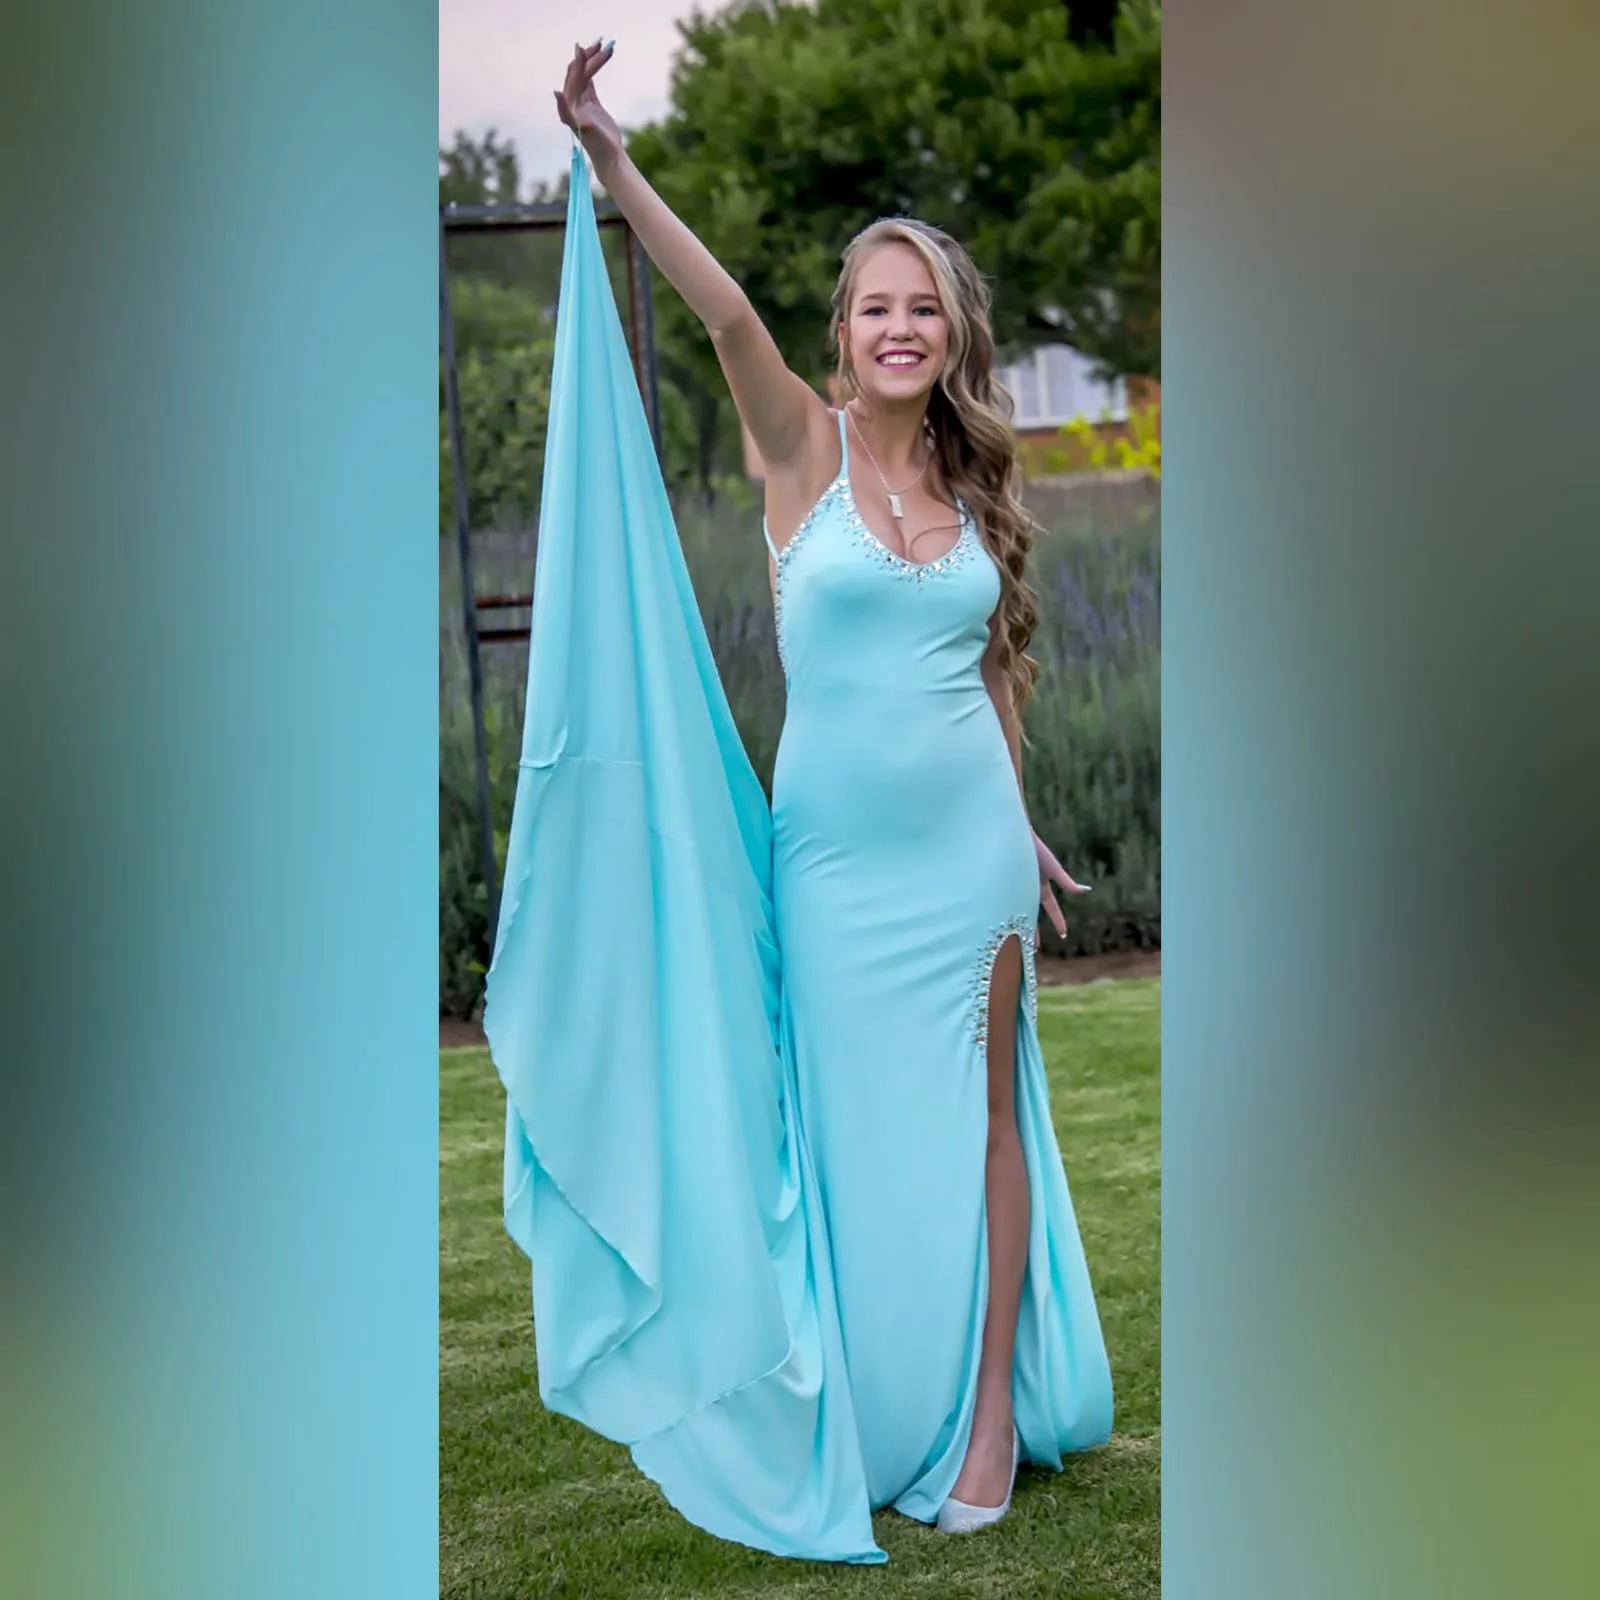 Aqua blue and silver prom dress 1 aqua blue and silver prom dress with a rounded neckline, open low v back with thin crossed straps, slit and a train. Dress detailed with silver beads and stones.